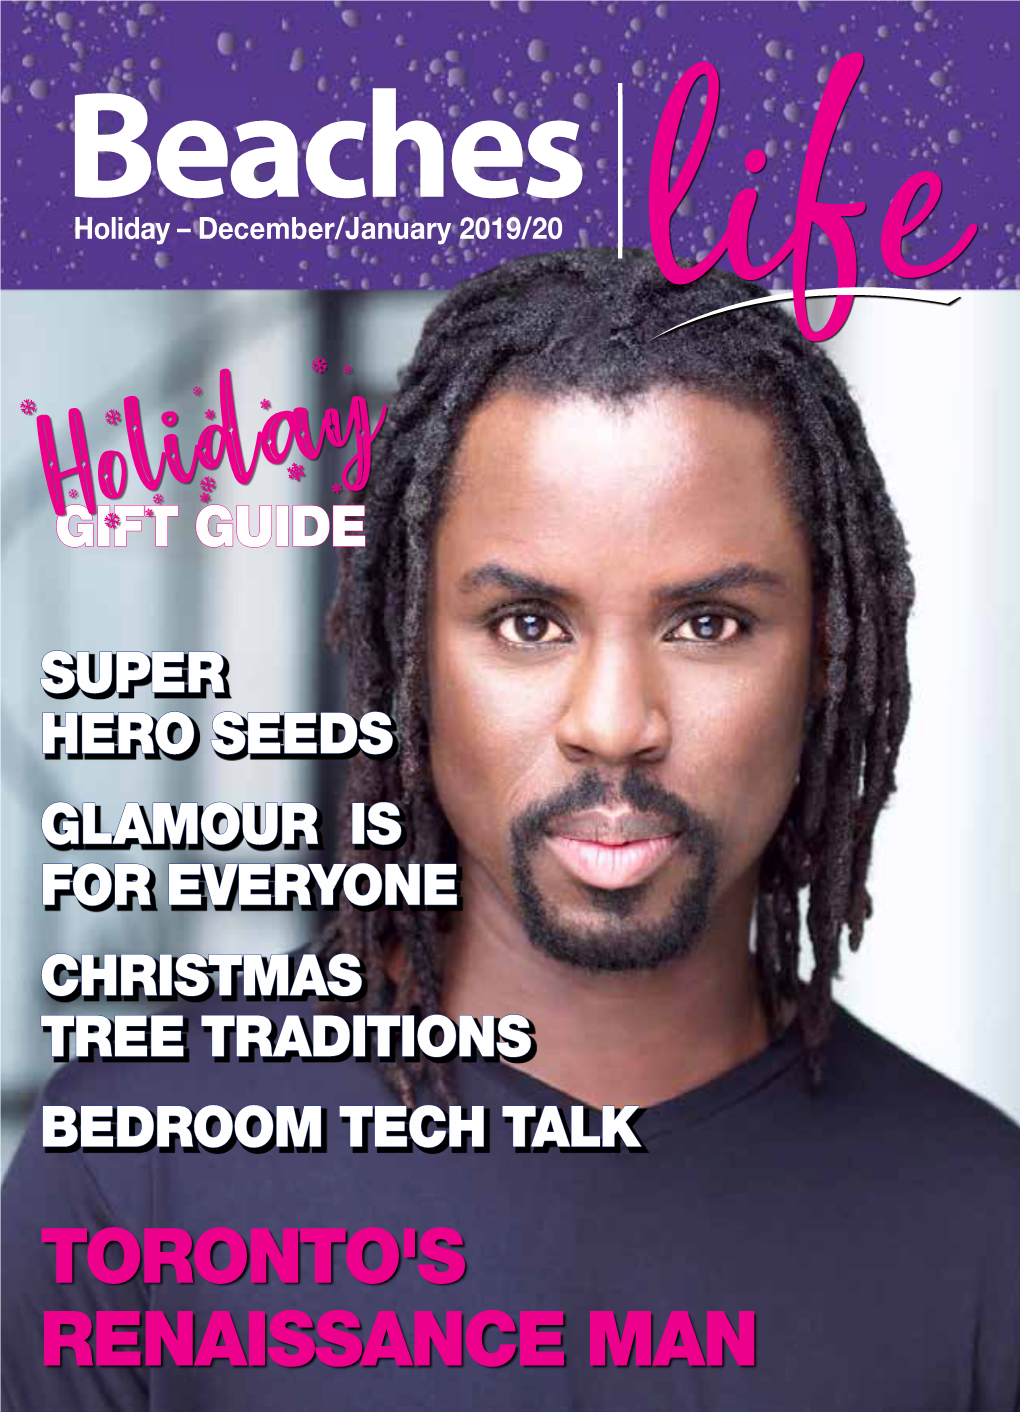 Toronto's Renaissance Man Cover Story in Every Issue 5 Jazz Man Sings the Sounds of the Season 16  Super Seeds for Super Health!